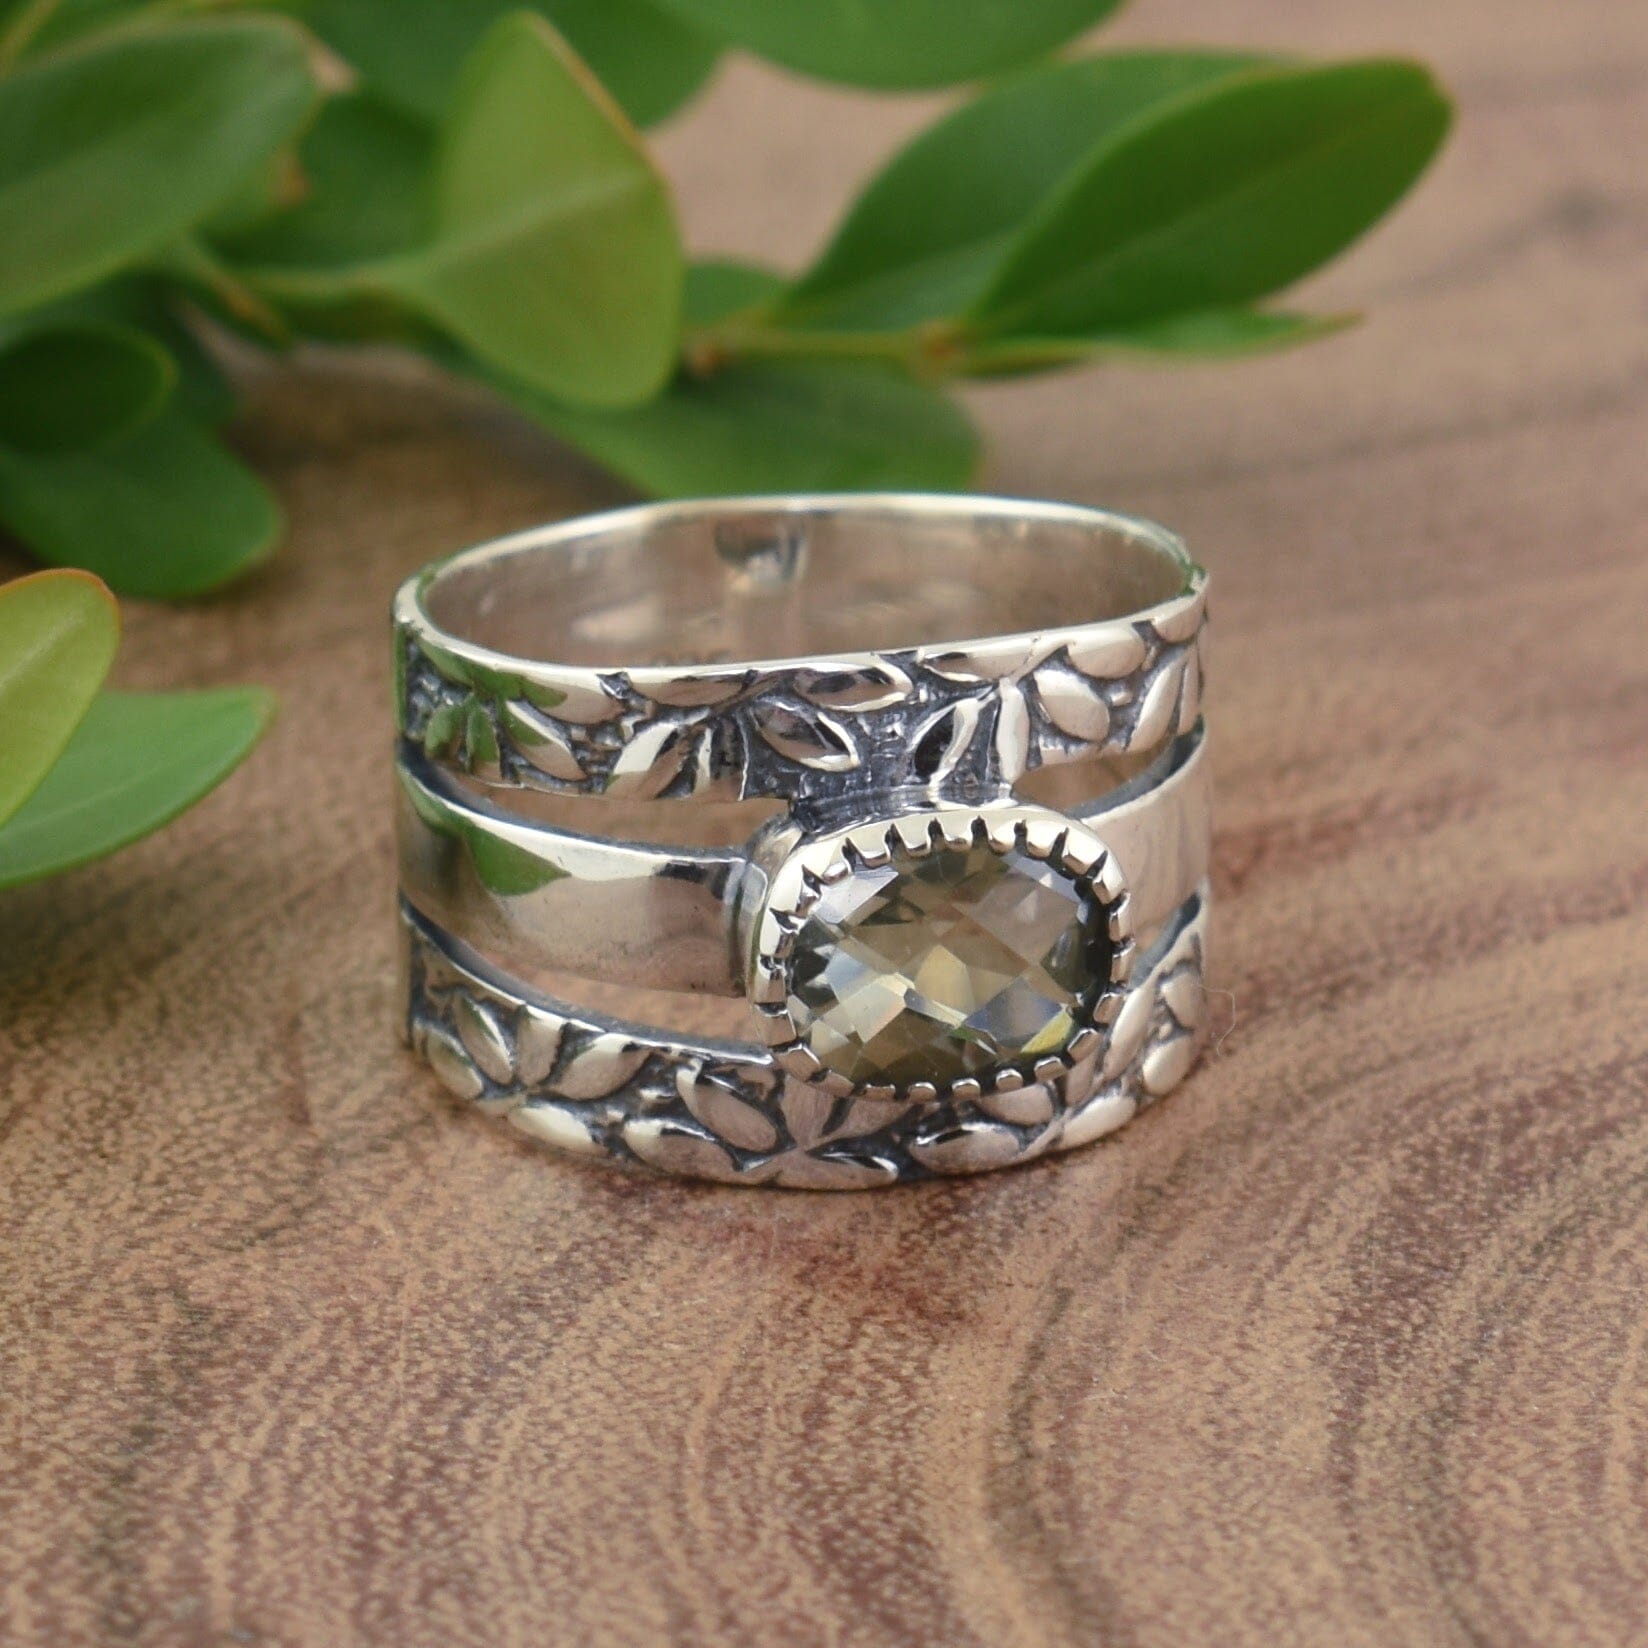 .925 sterling silver ring with a botanical design and an oval light green amethyst stone